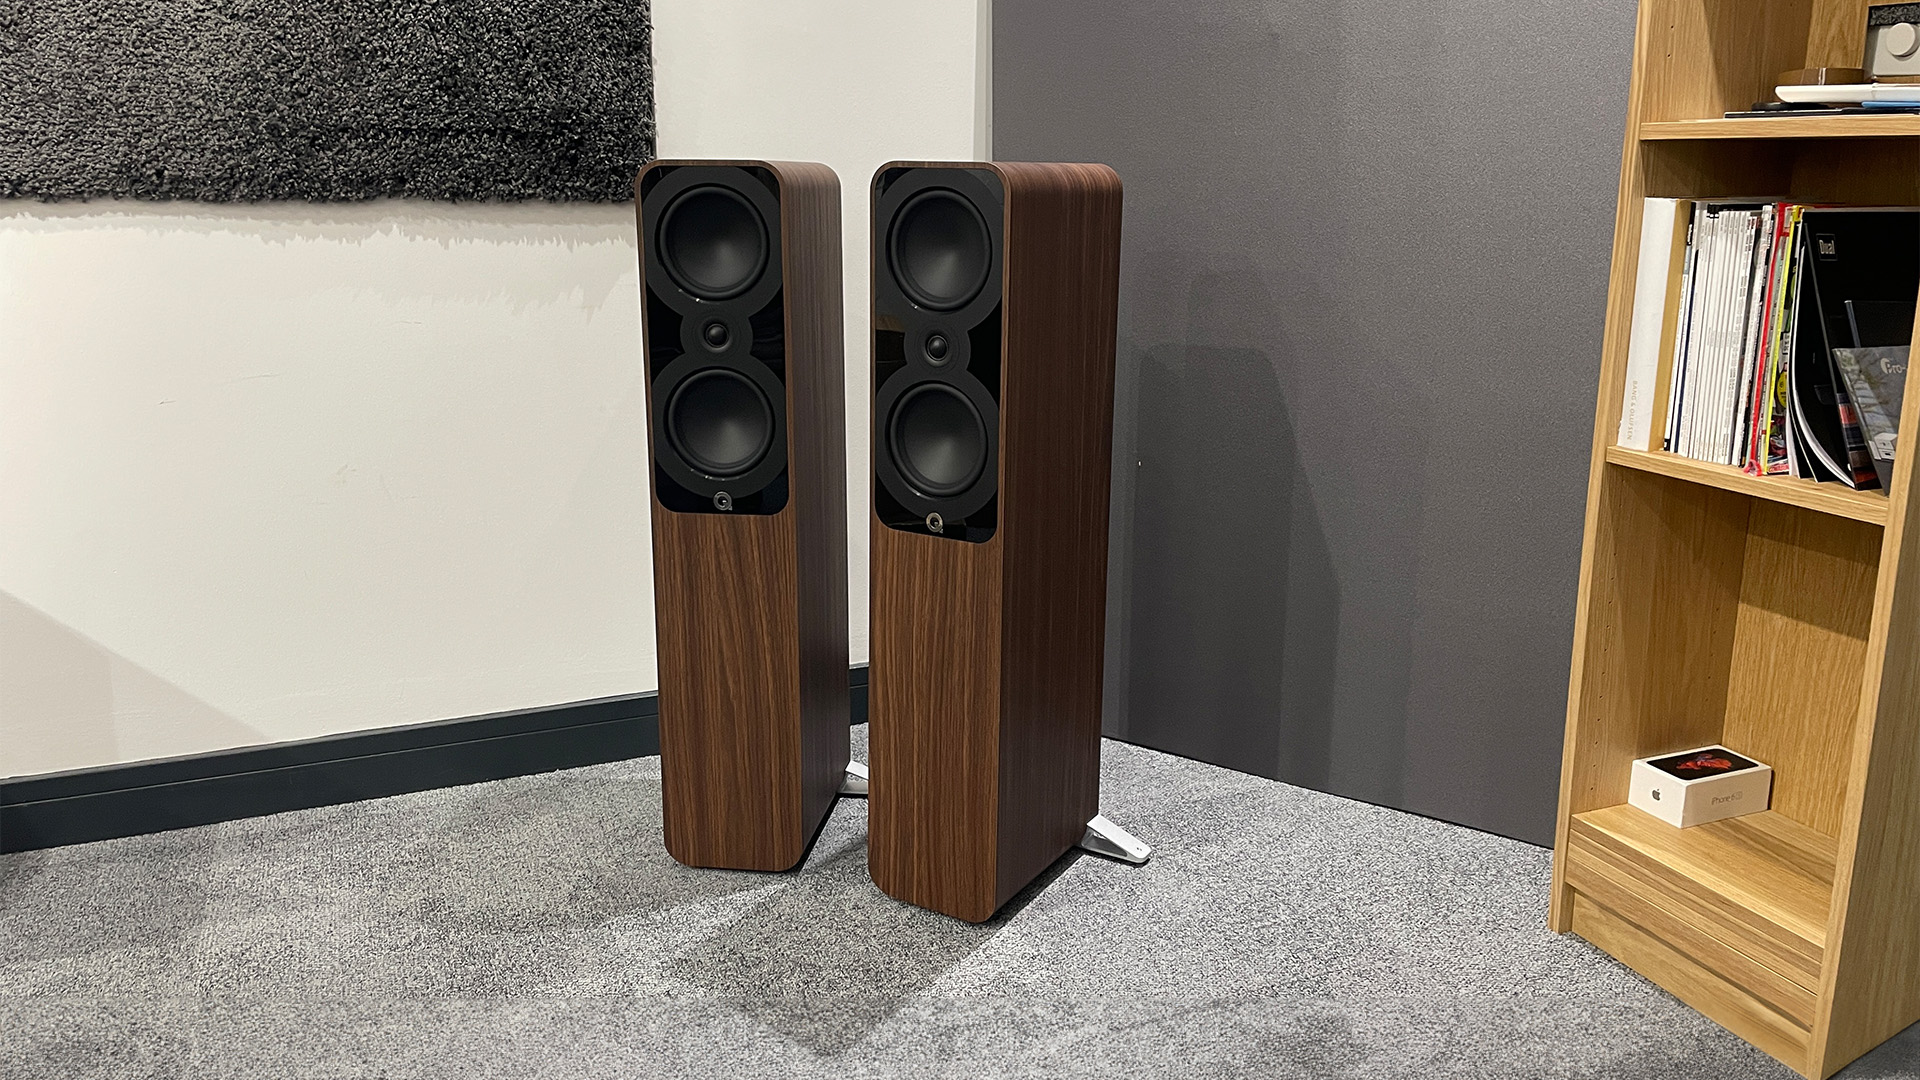 Rewind: big changes for Q Acoustics’ sound, developments in OLED, new premium turntables and more appear